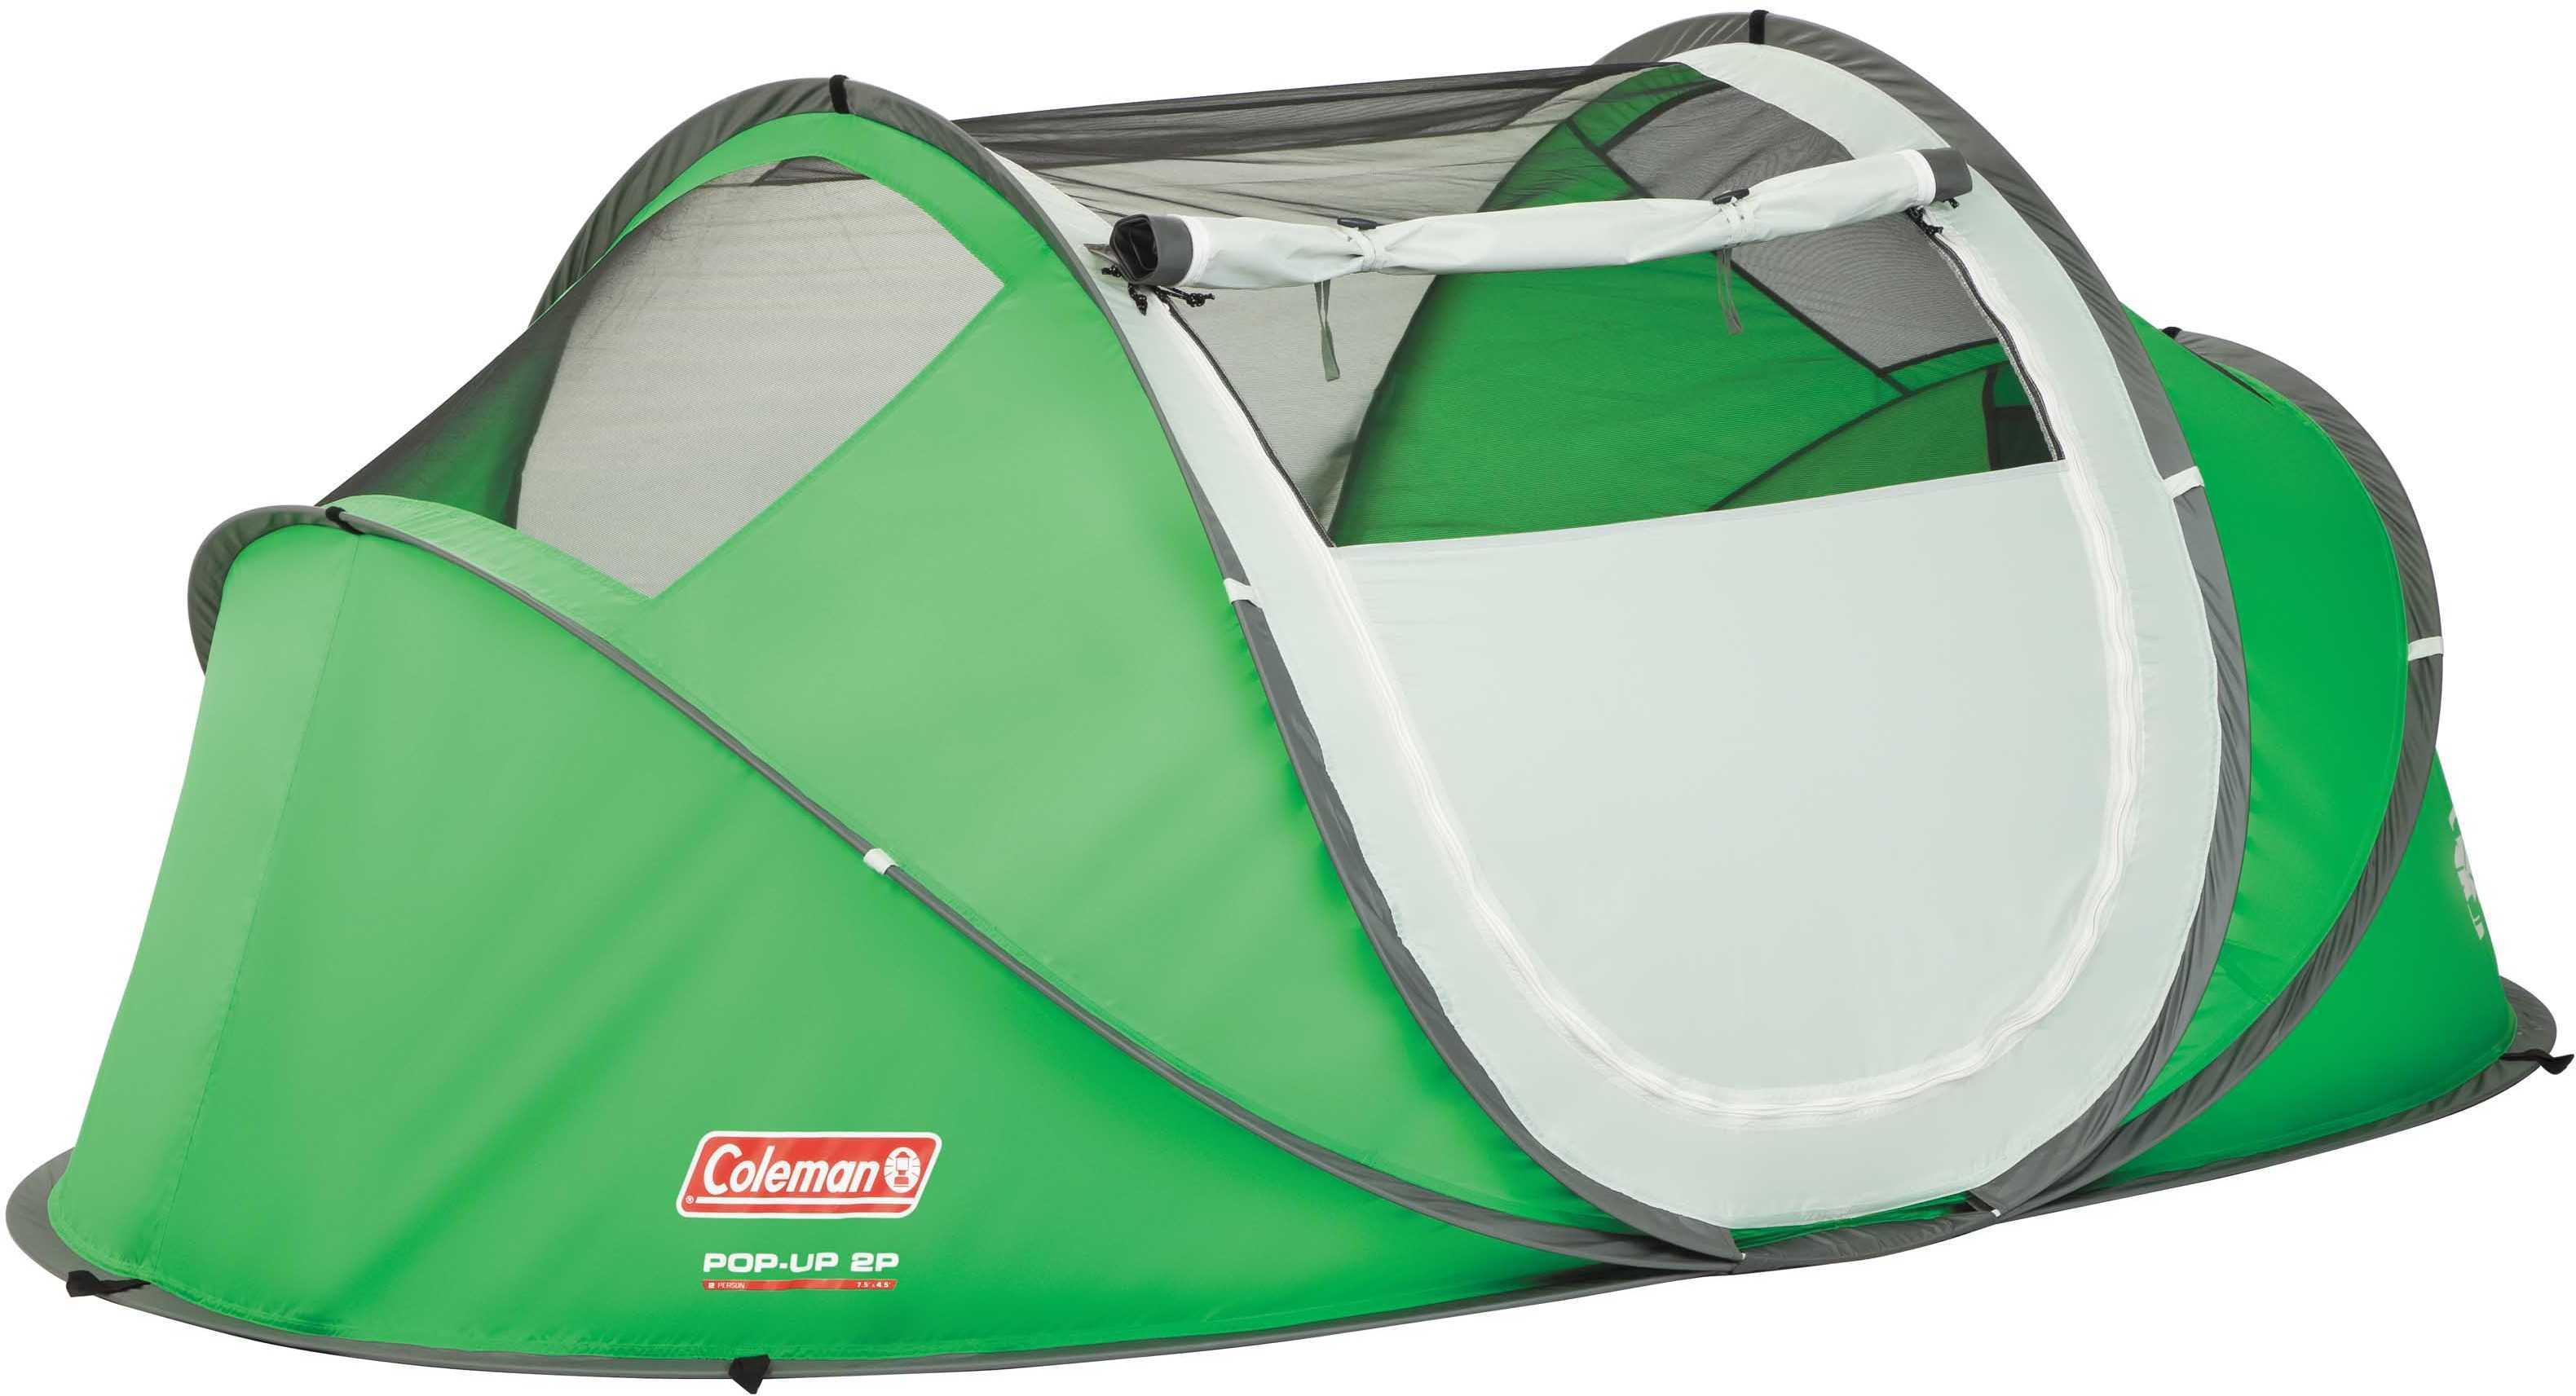 Coleman Pop-Up Tent 2 Person Md: 2000014781